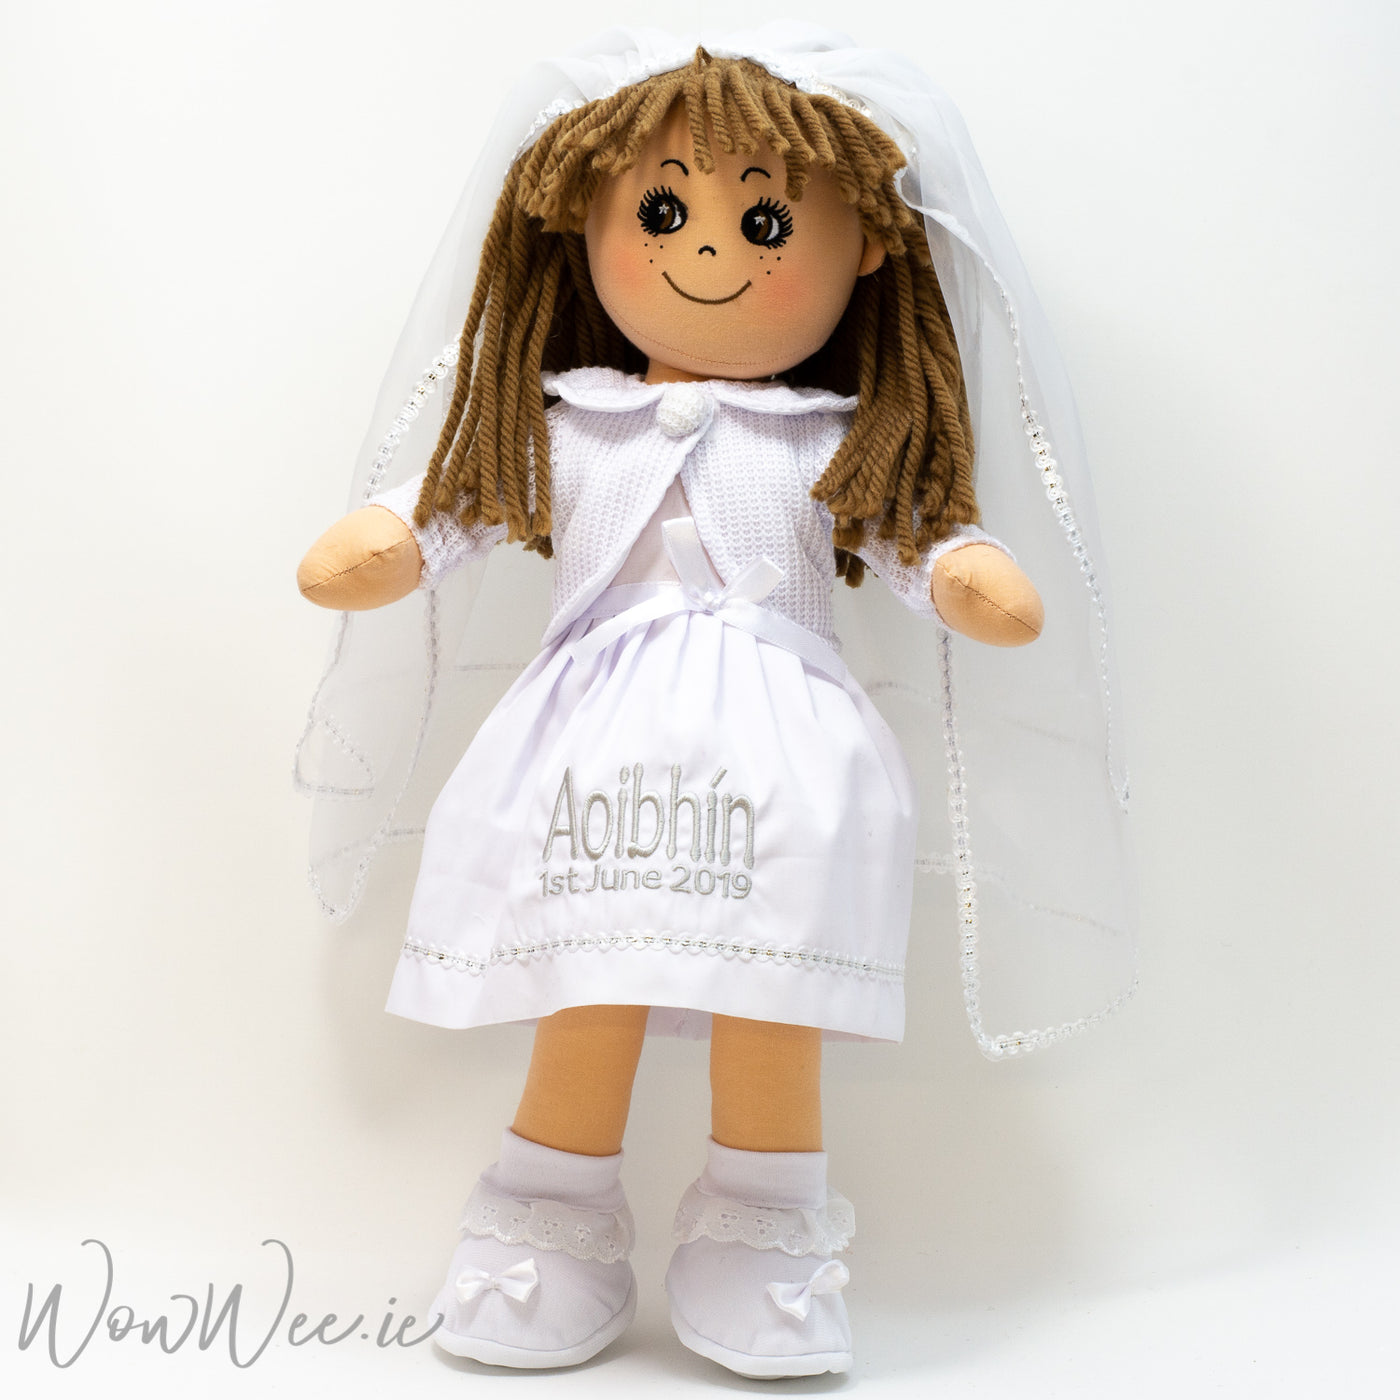 Personalised Communion Rag Doll is a gorgeous keepsake for a little girl on her special day. 4 different hair colour options to choose from to match the Communion Girl.